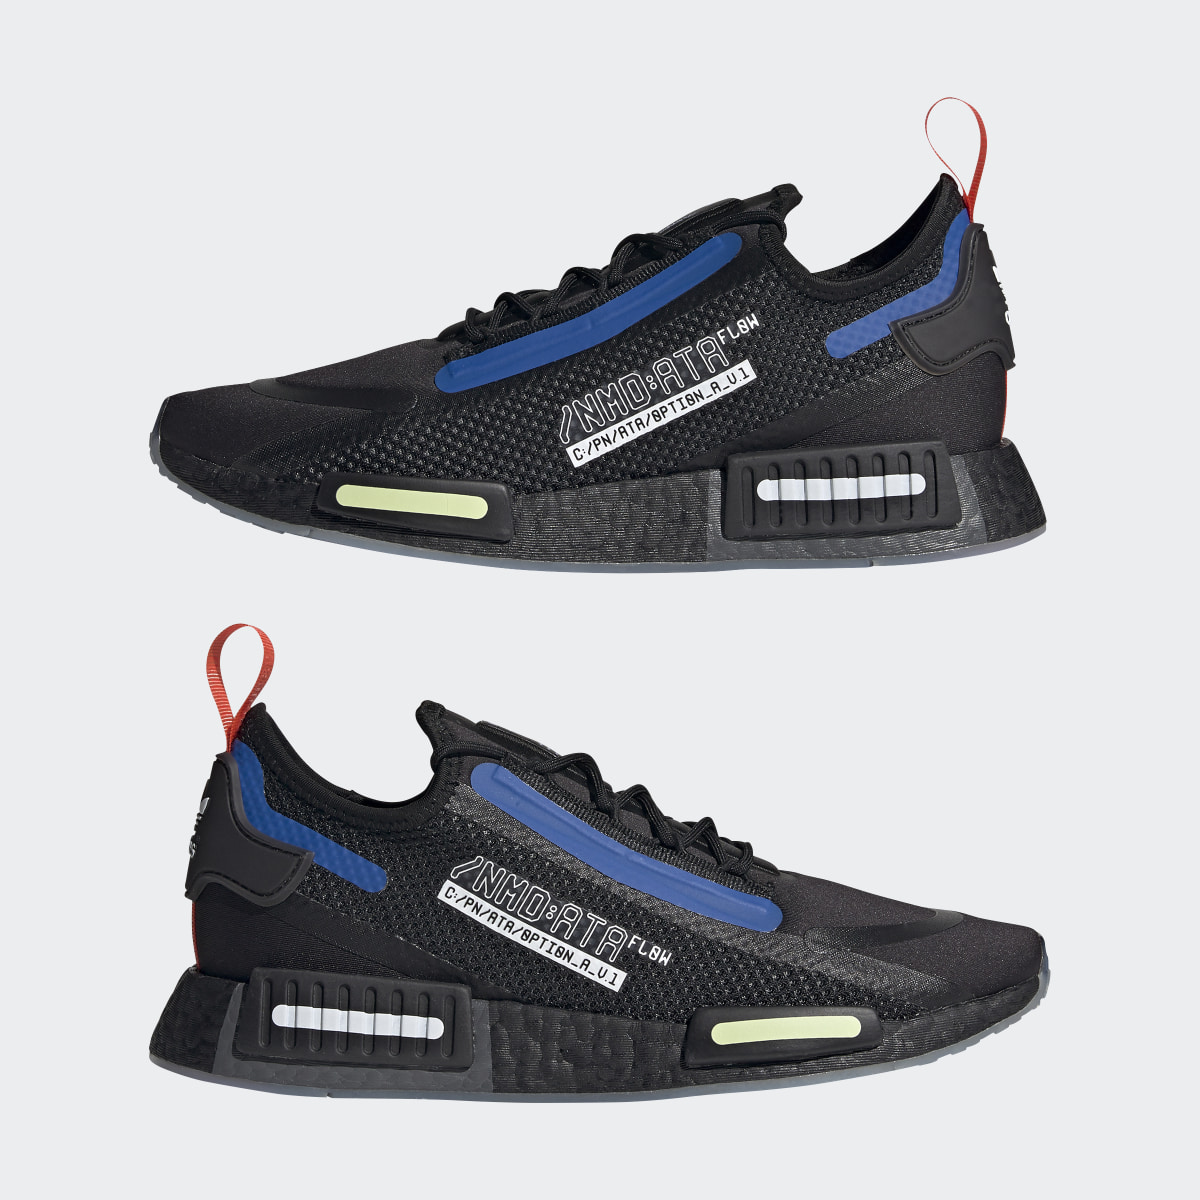 Adidas NMD_R1 SPECTOO SHOES. 9